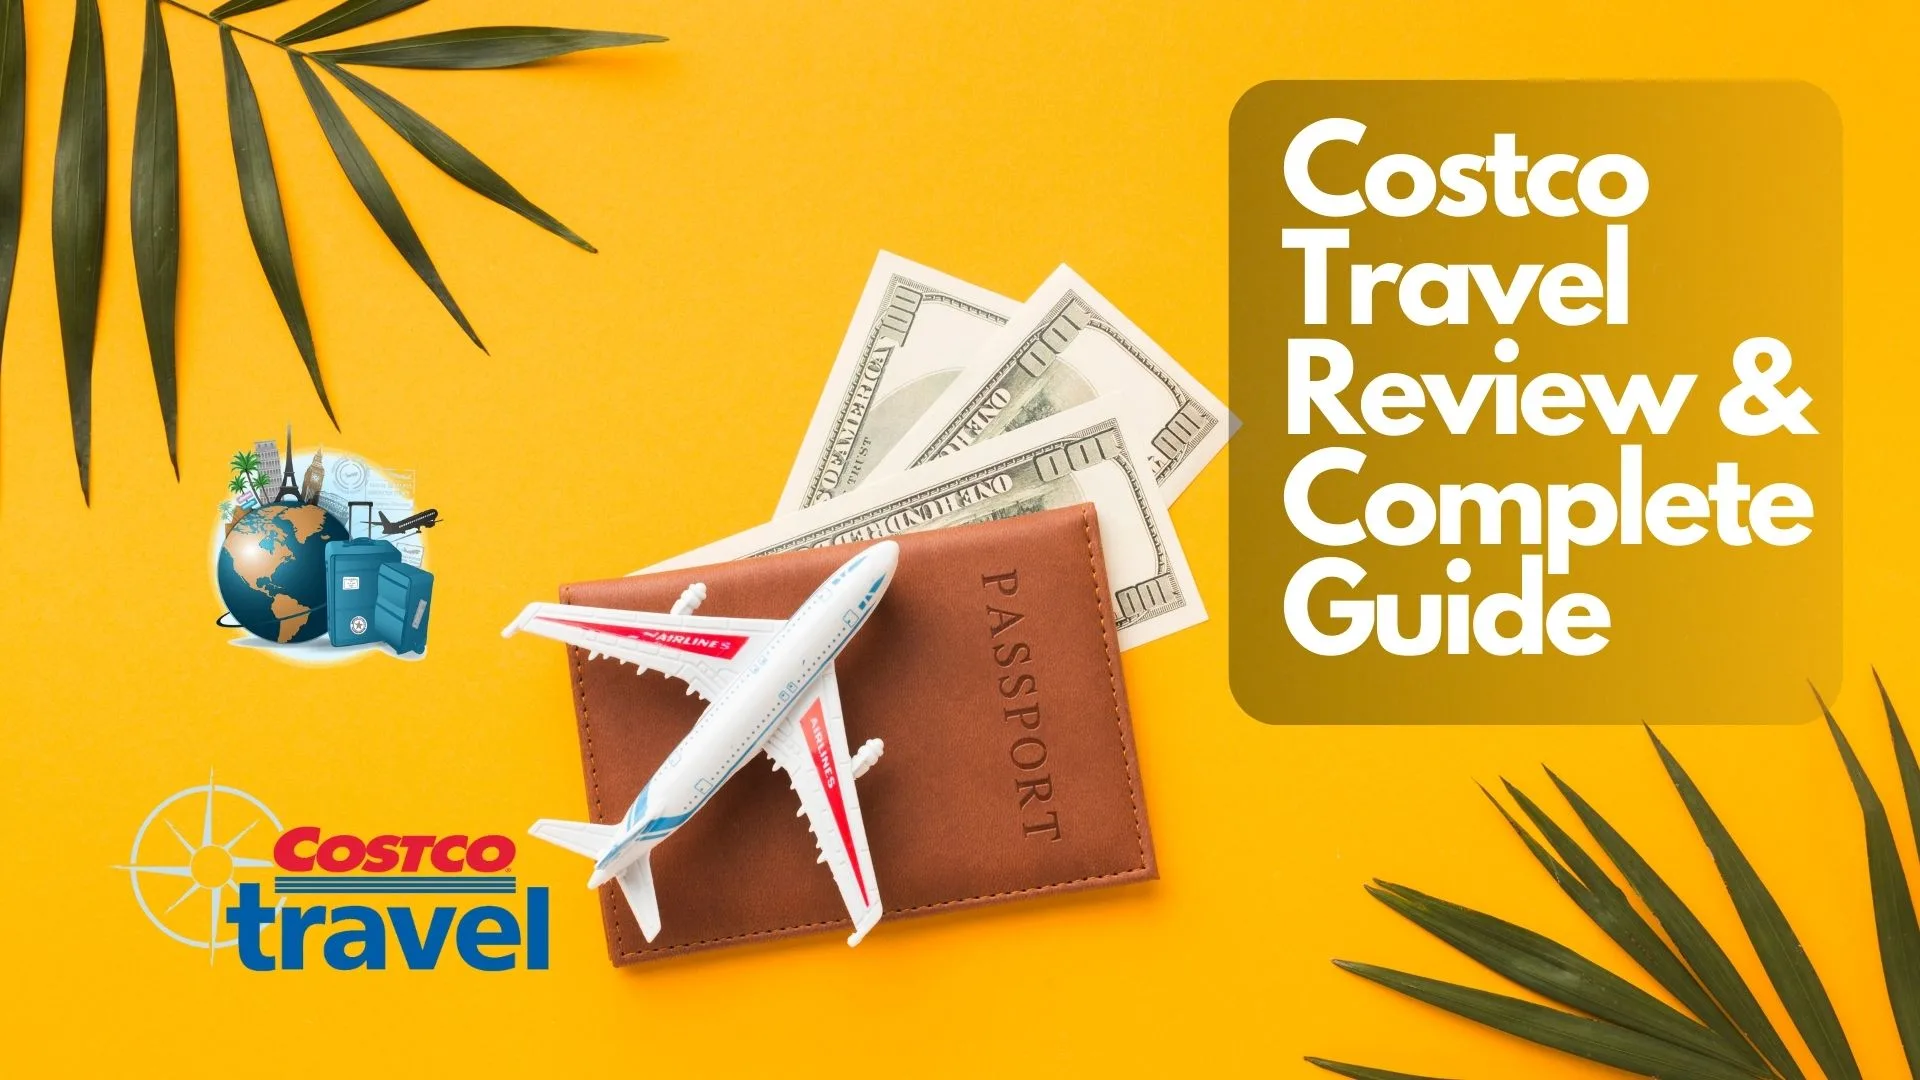 Costco Travel Review & Complete Guide